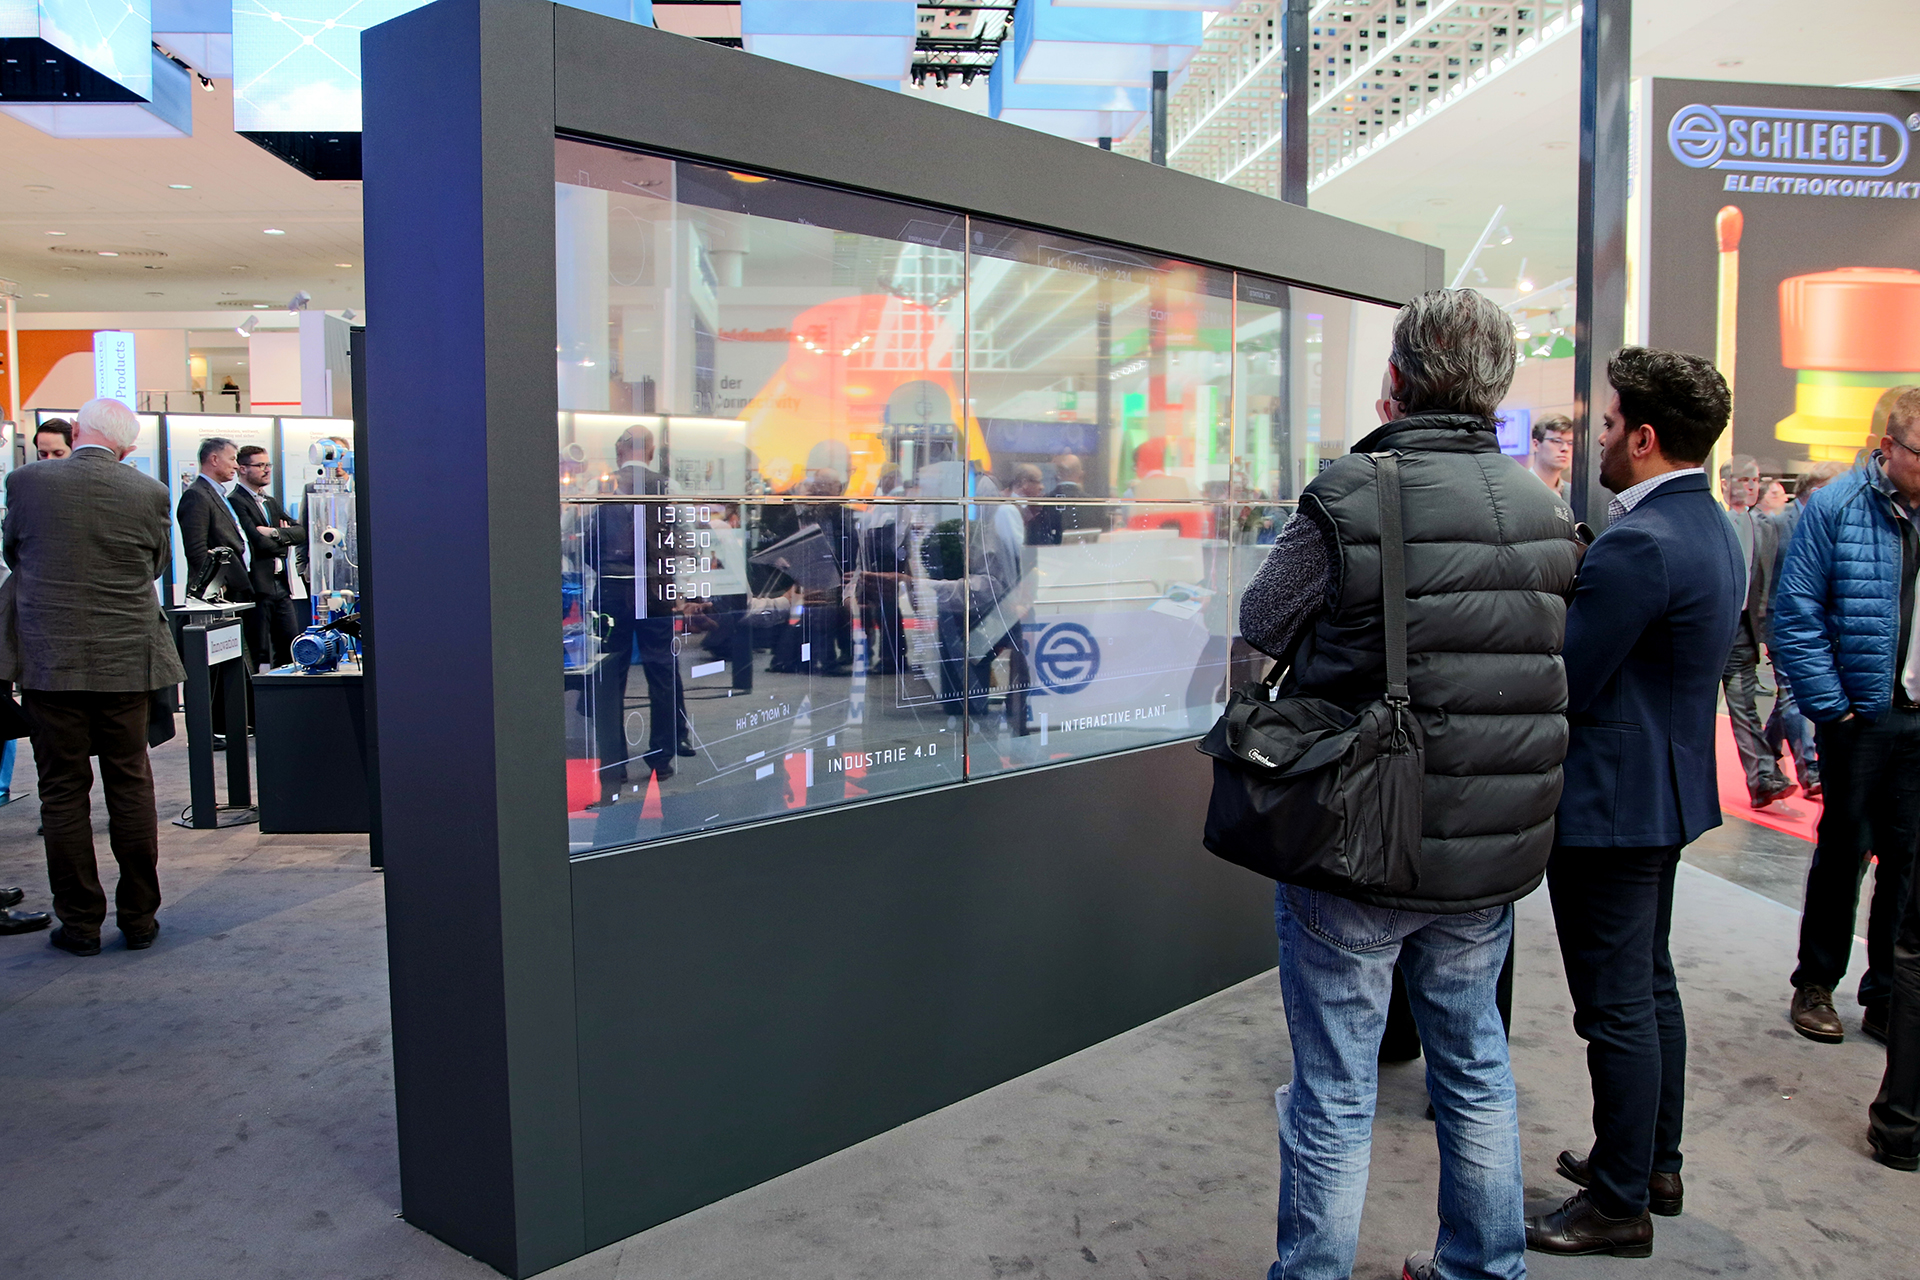 With a transparent, interactive OLED Powerwall, Endress & Hauser presented its products and services at HMI.